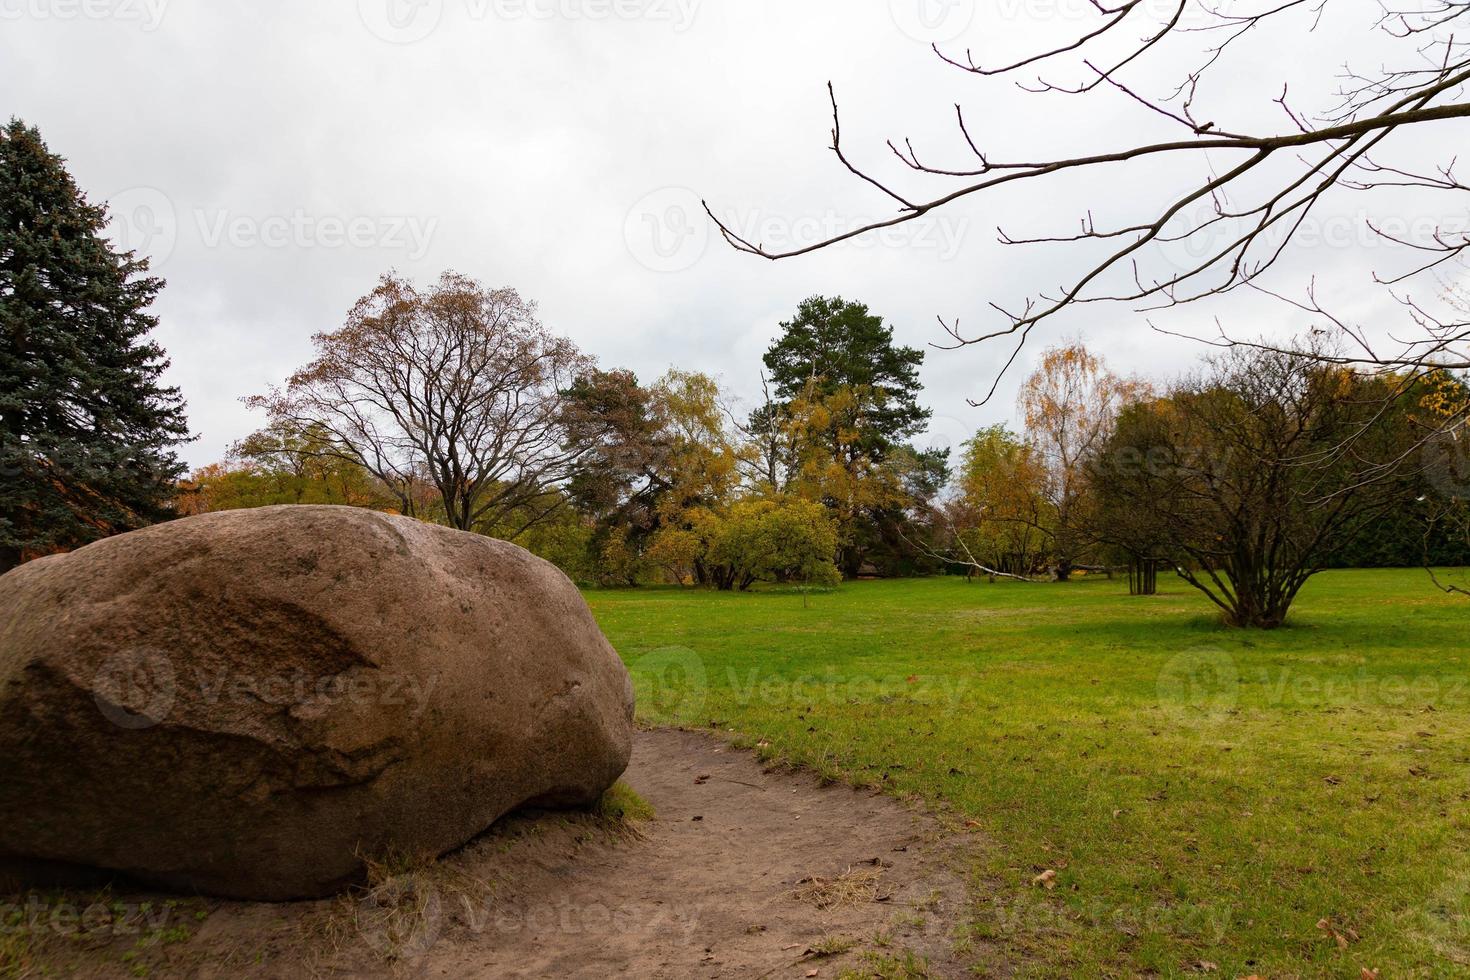 Large natural granite stone among green grass and trees. Scenery photo